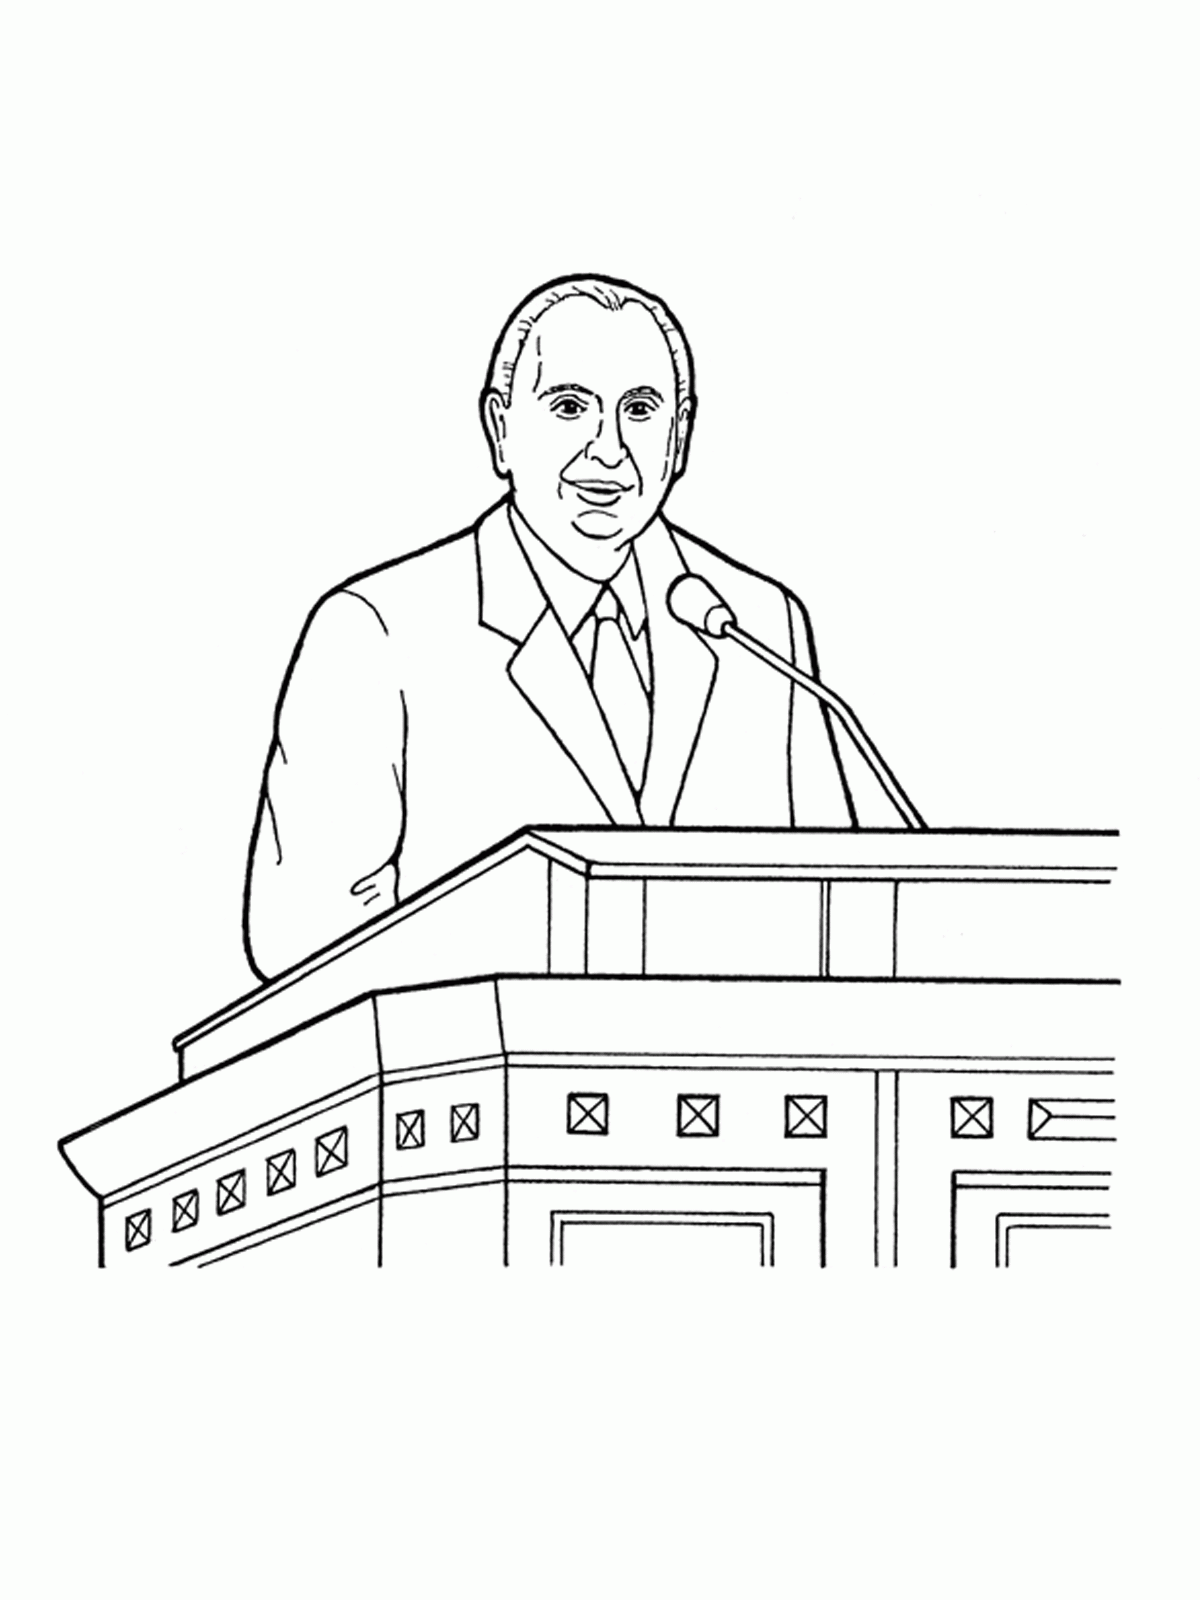 President Monson Coloring Page - Coloring Pages for Kids and for ...